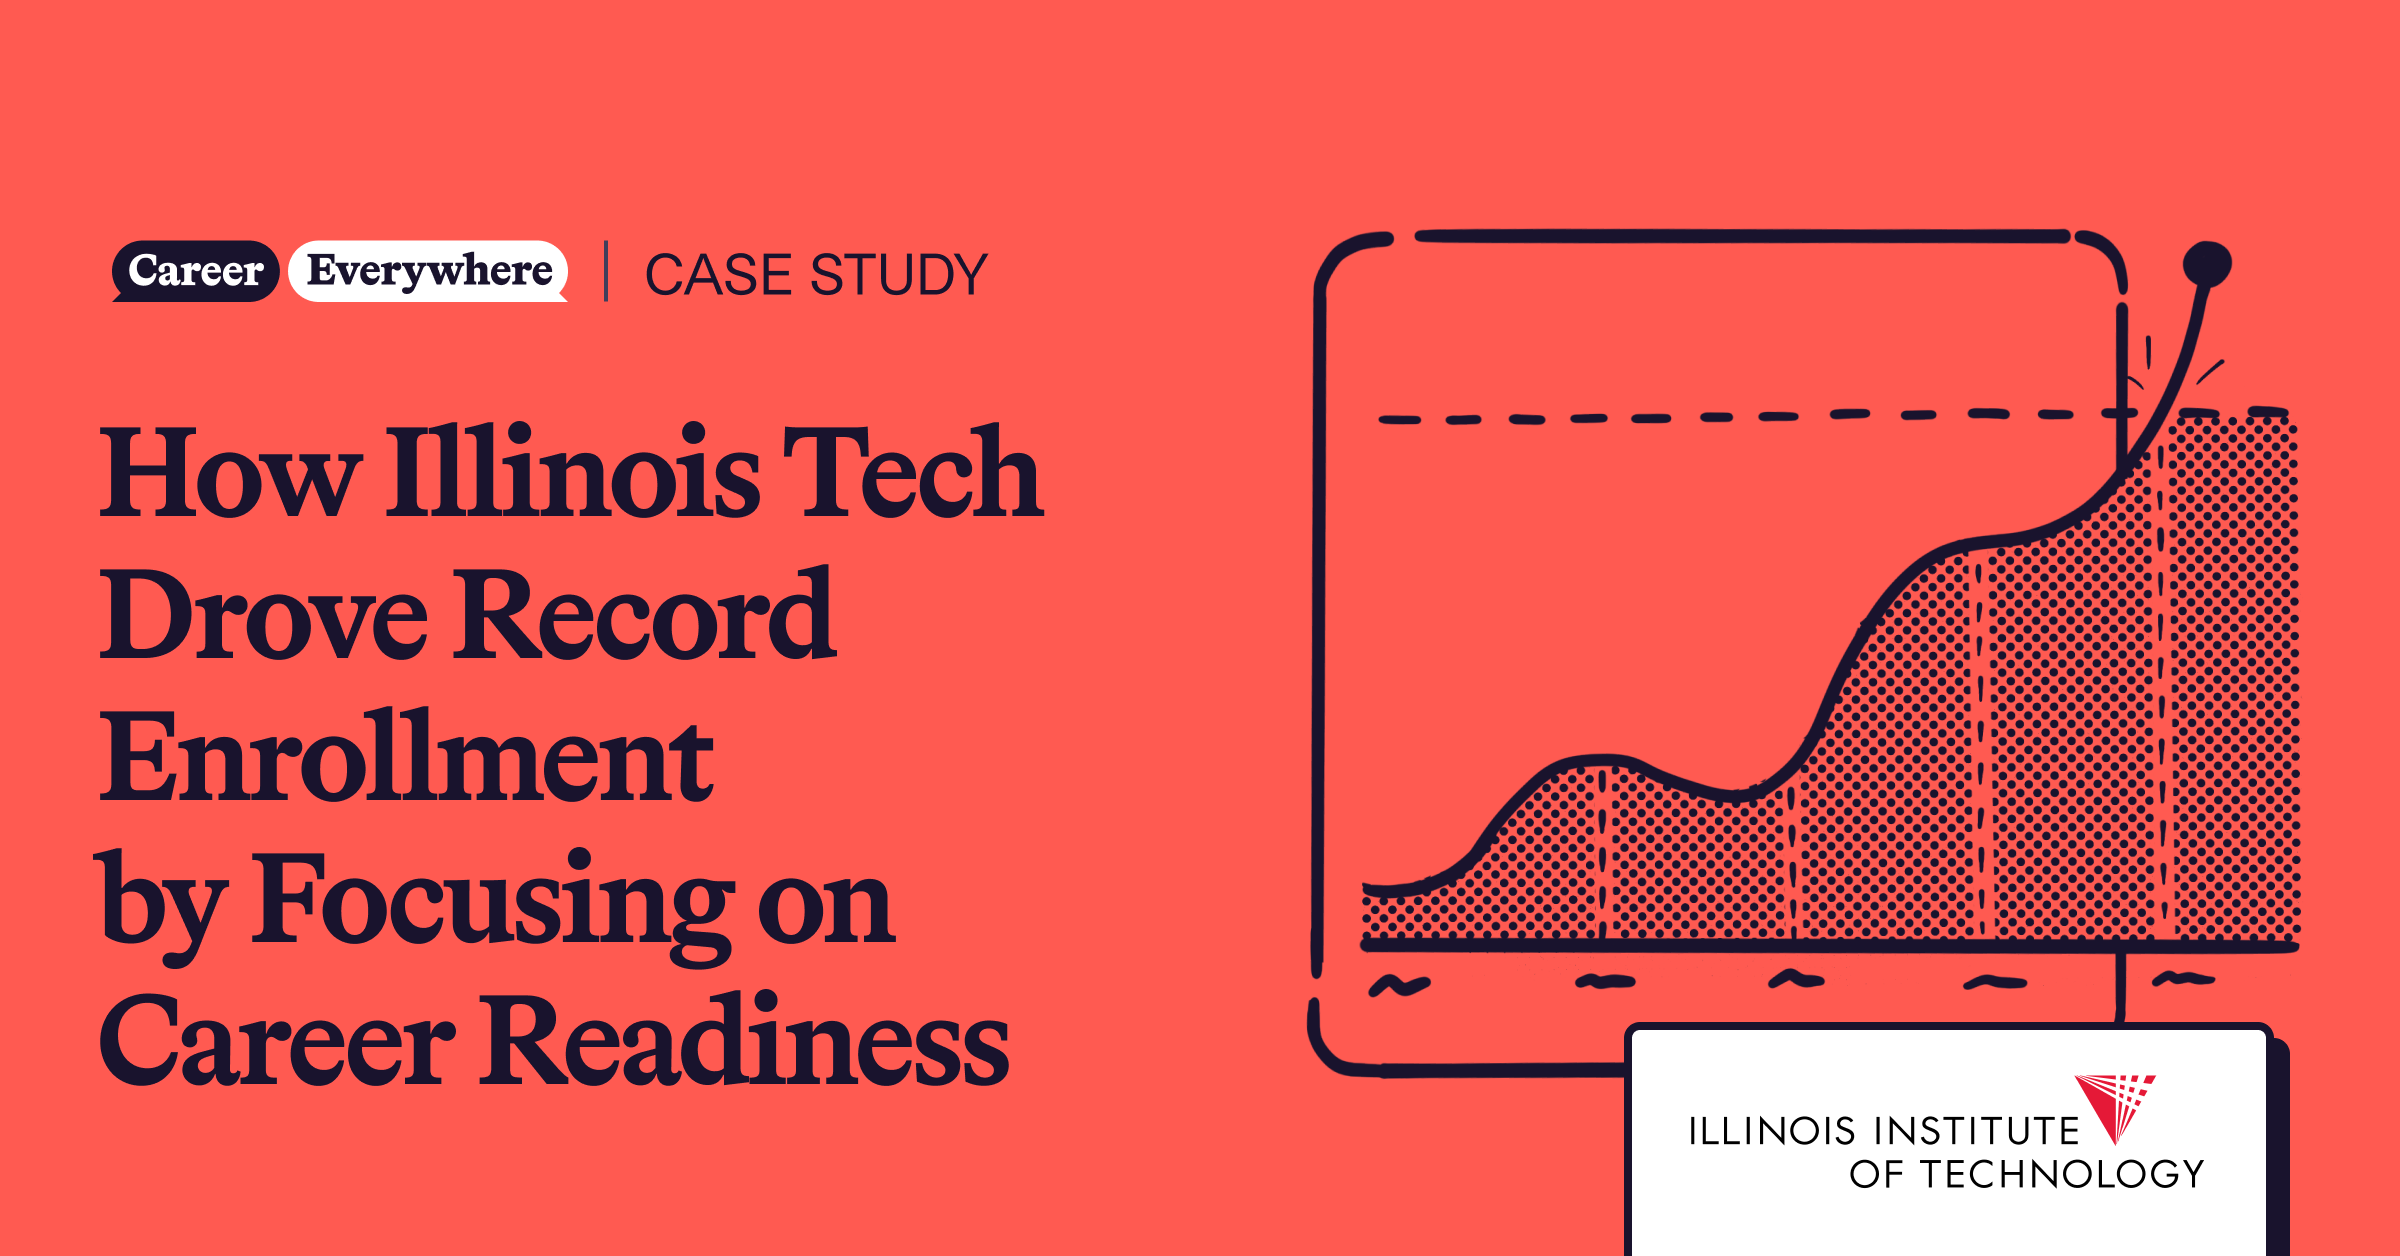 How Illinois Tech drove record enrollment by focusing on career readiness